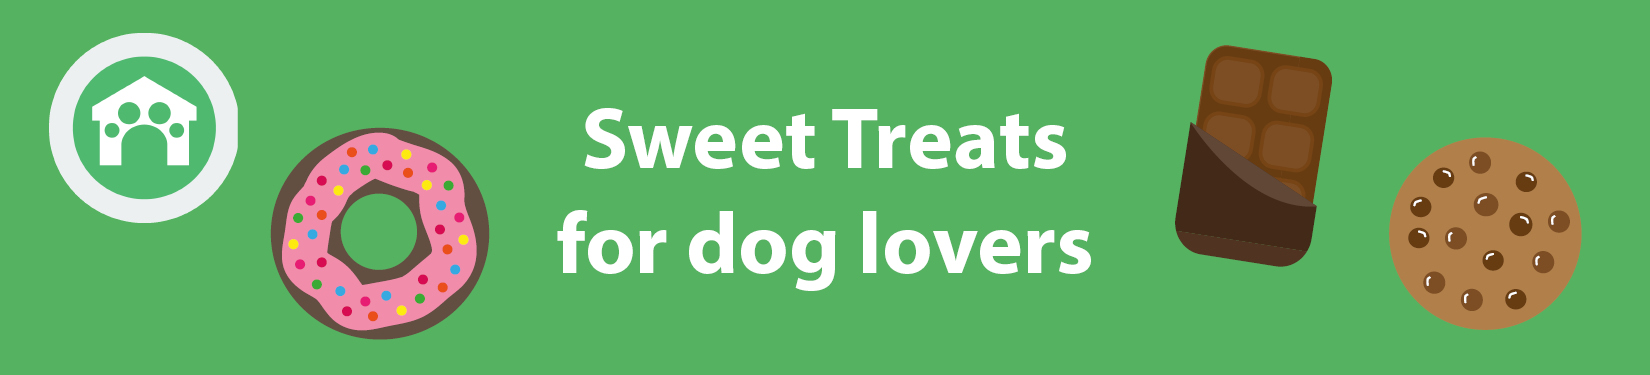 Sweet treat gifts for dog lovers header image